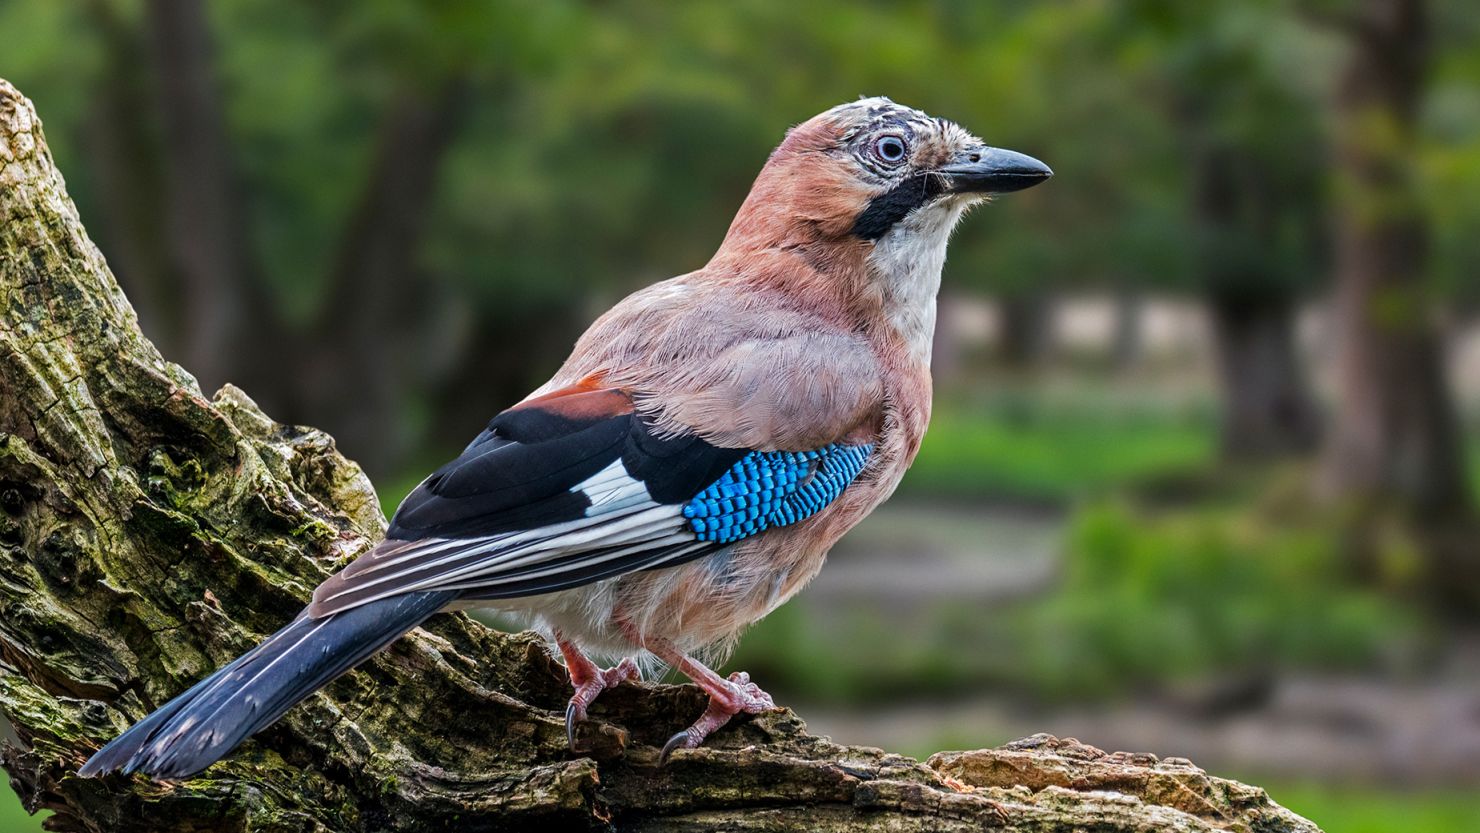 Eurasian jays can recall incidental visual information within a remembered event, new research shows, providing evidence of episodic-like memory in the birds.